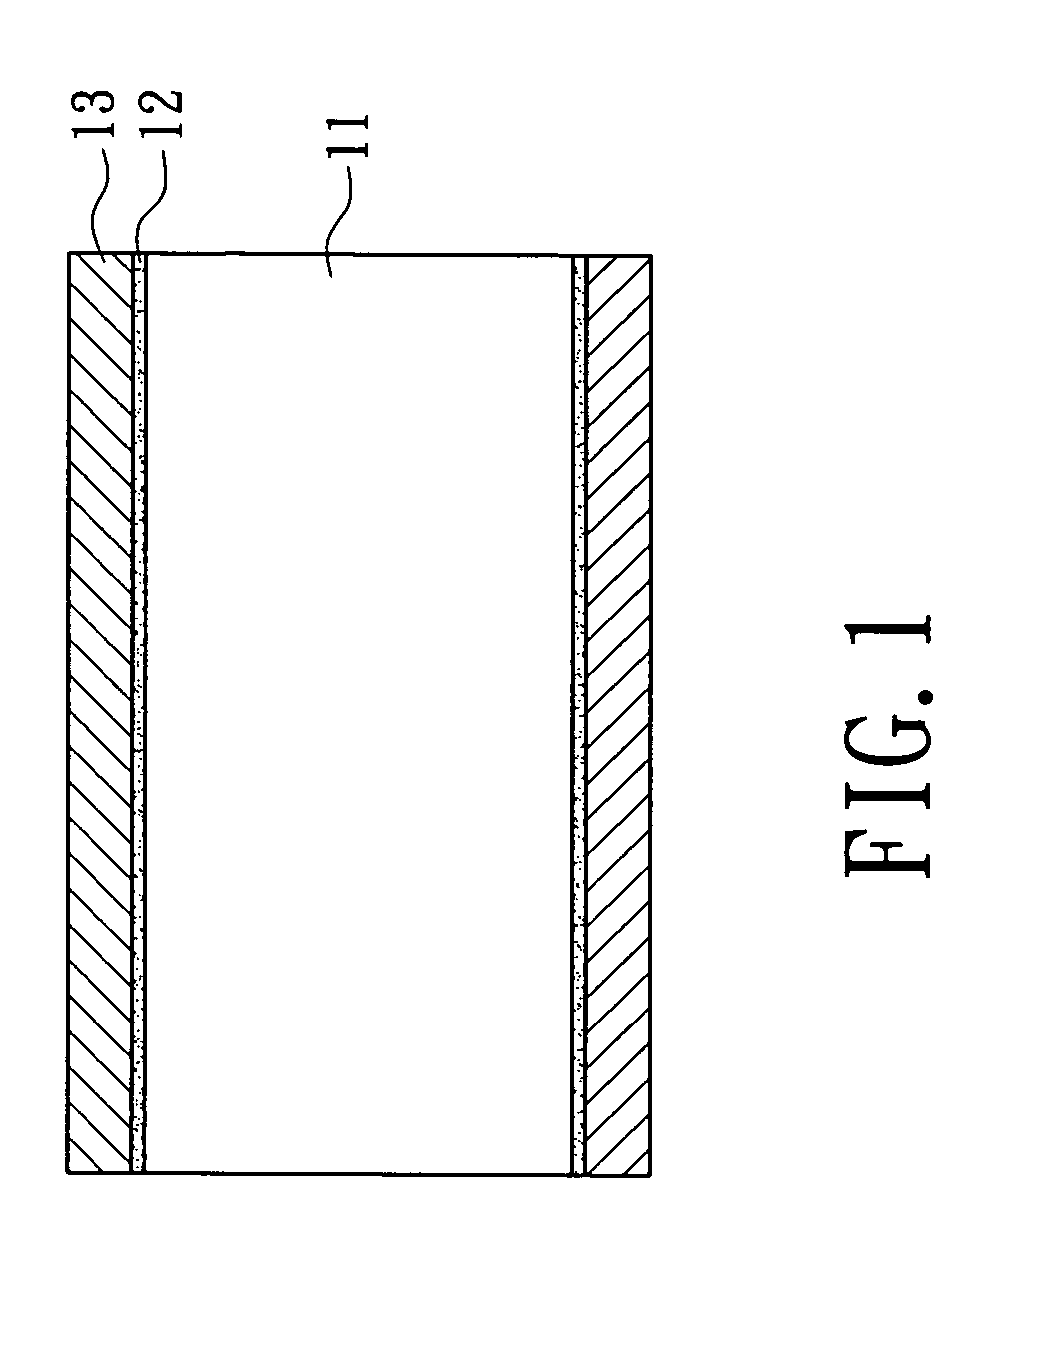 Conductive antenna structure and method for making the same